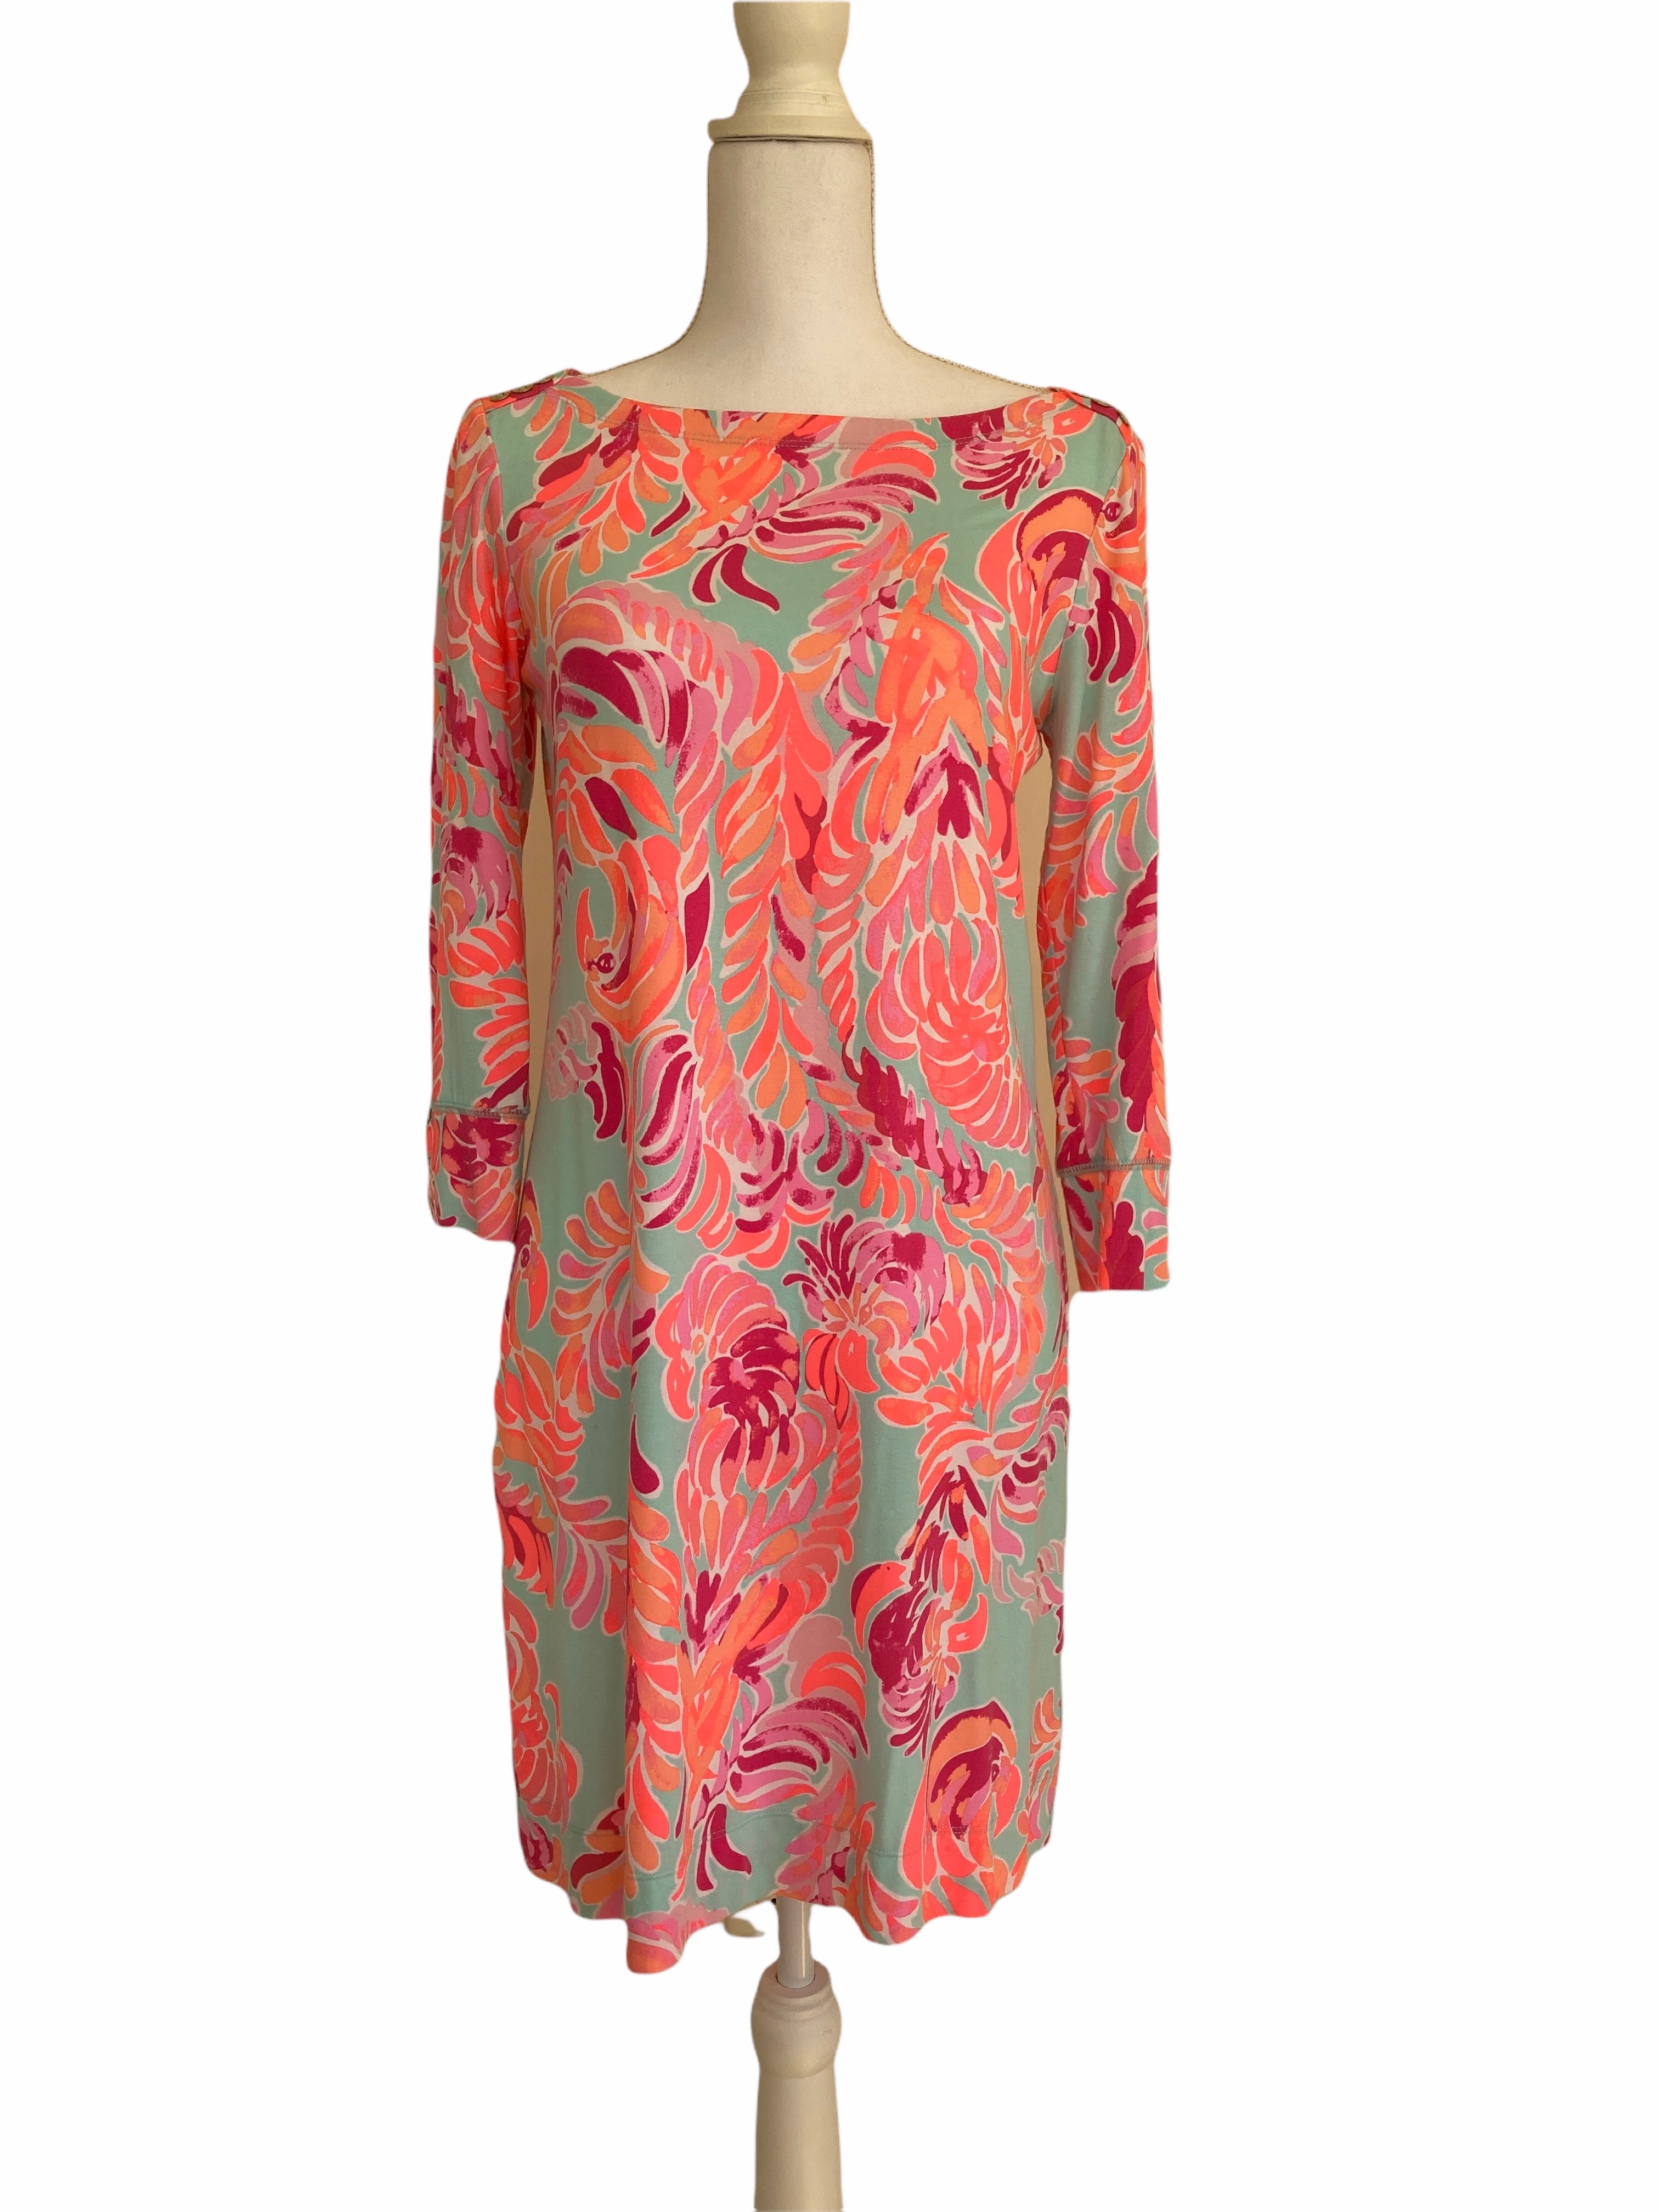 Lilly Pulitzer "Sophie" Dress, M